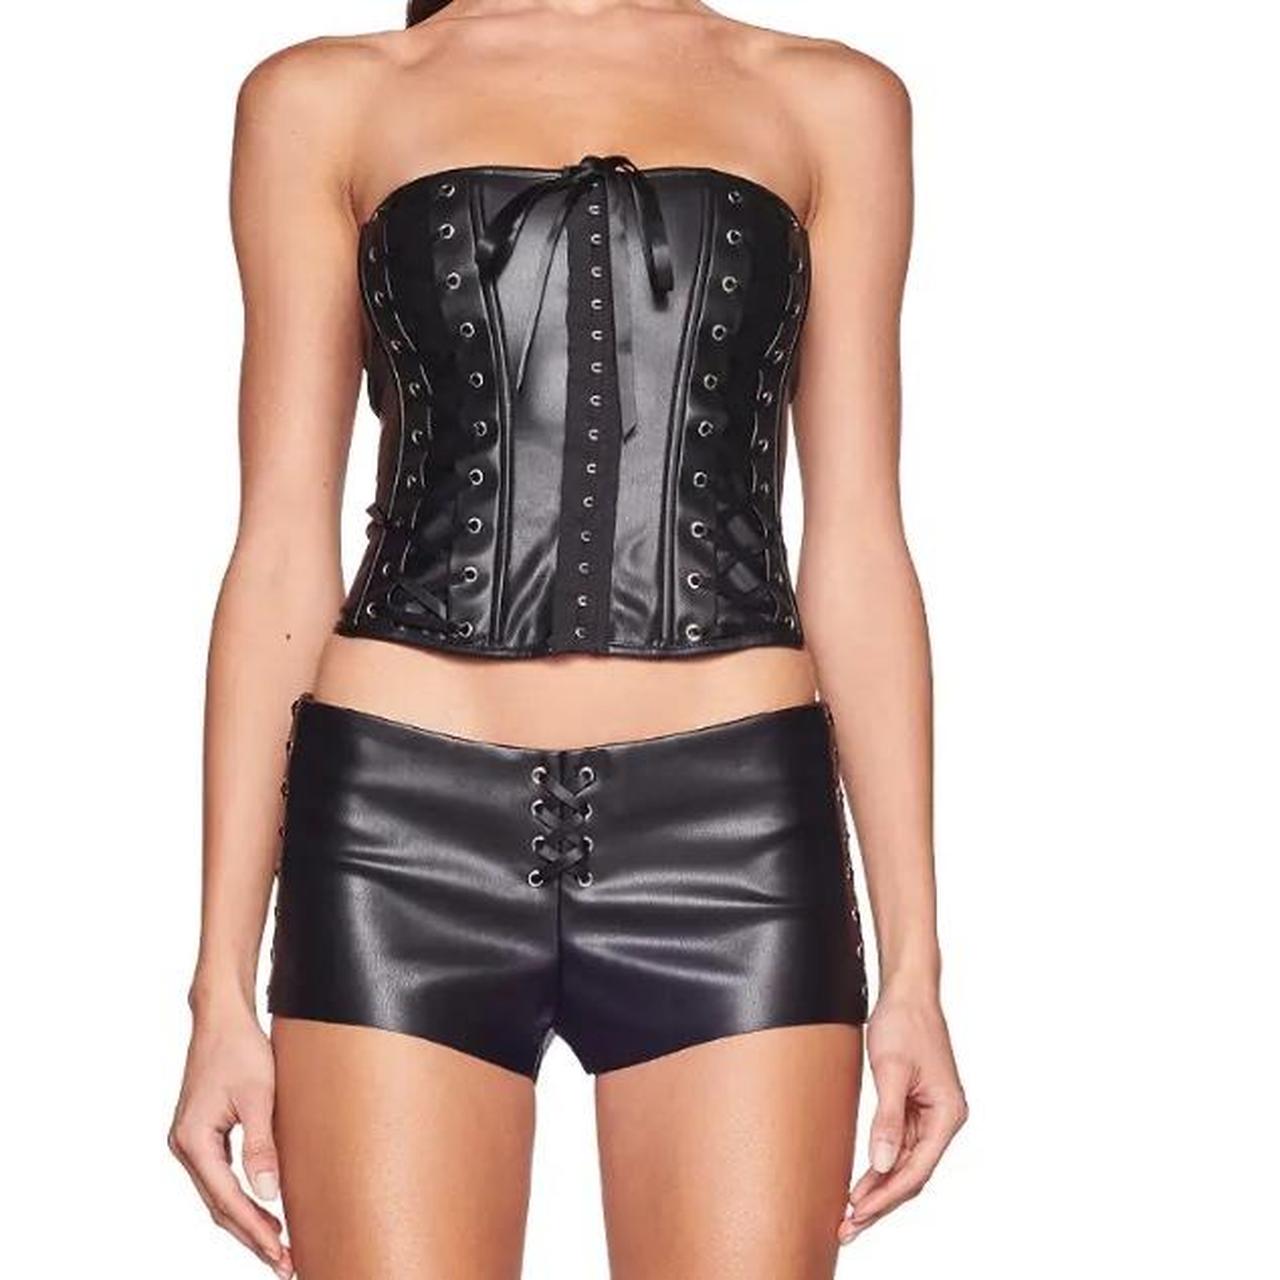 I.AM.GIA Angelica Corset Top in Black